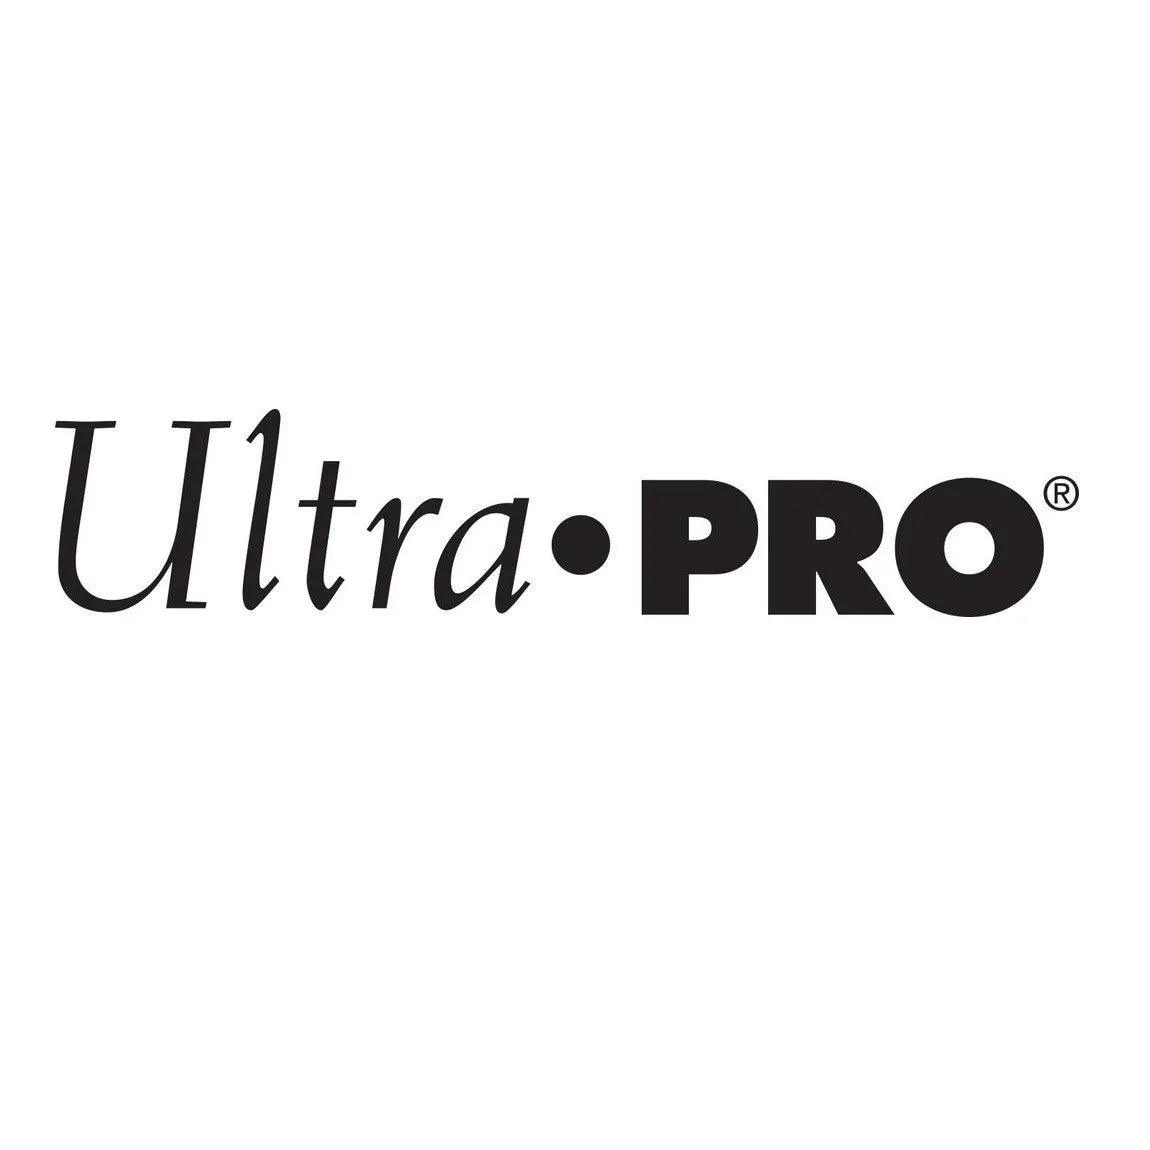 Ultra PRO - 9 Pocket Pages (25ct) for Standard Size Cards - Silver Series - Hobby Champion Inc